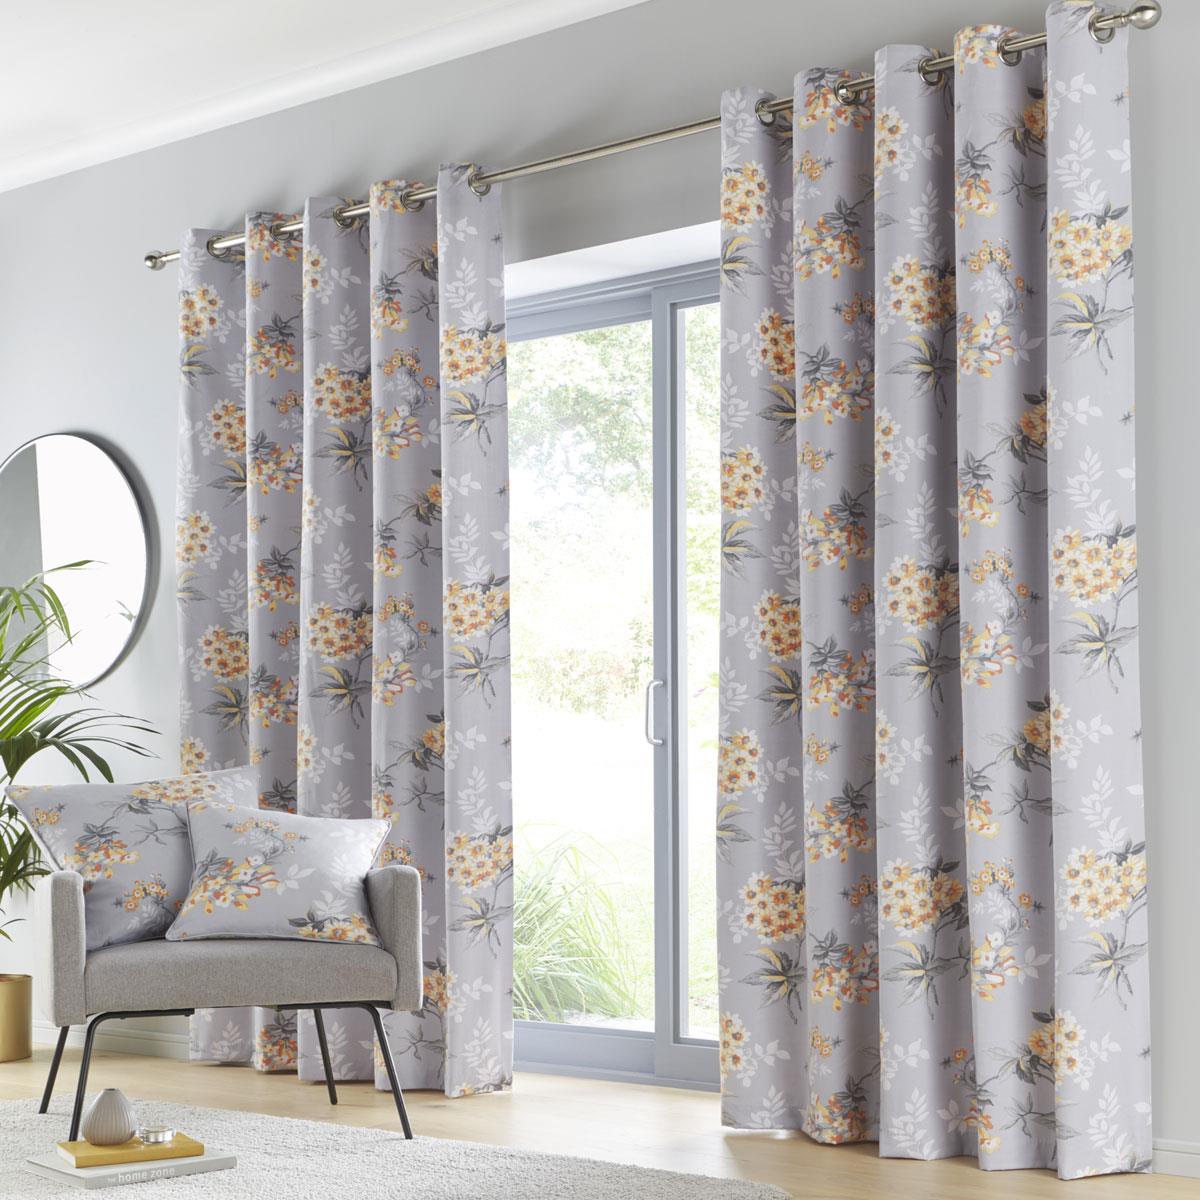 Grey curtains ochre yellow flowers lined ready made floral pair window door